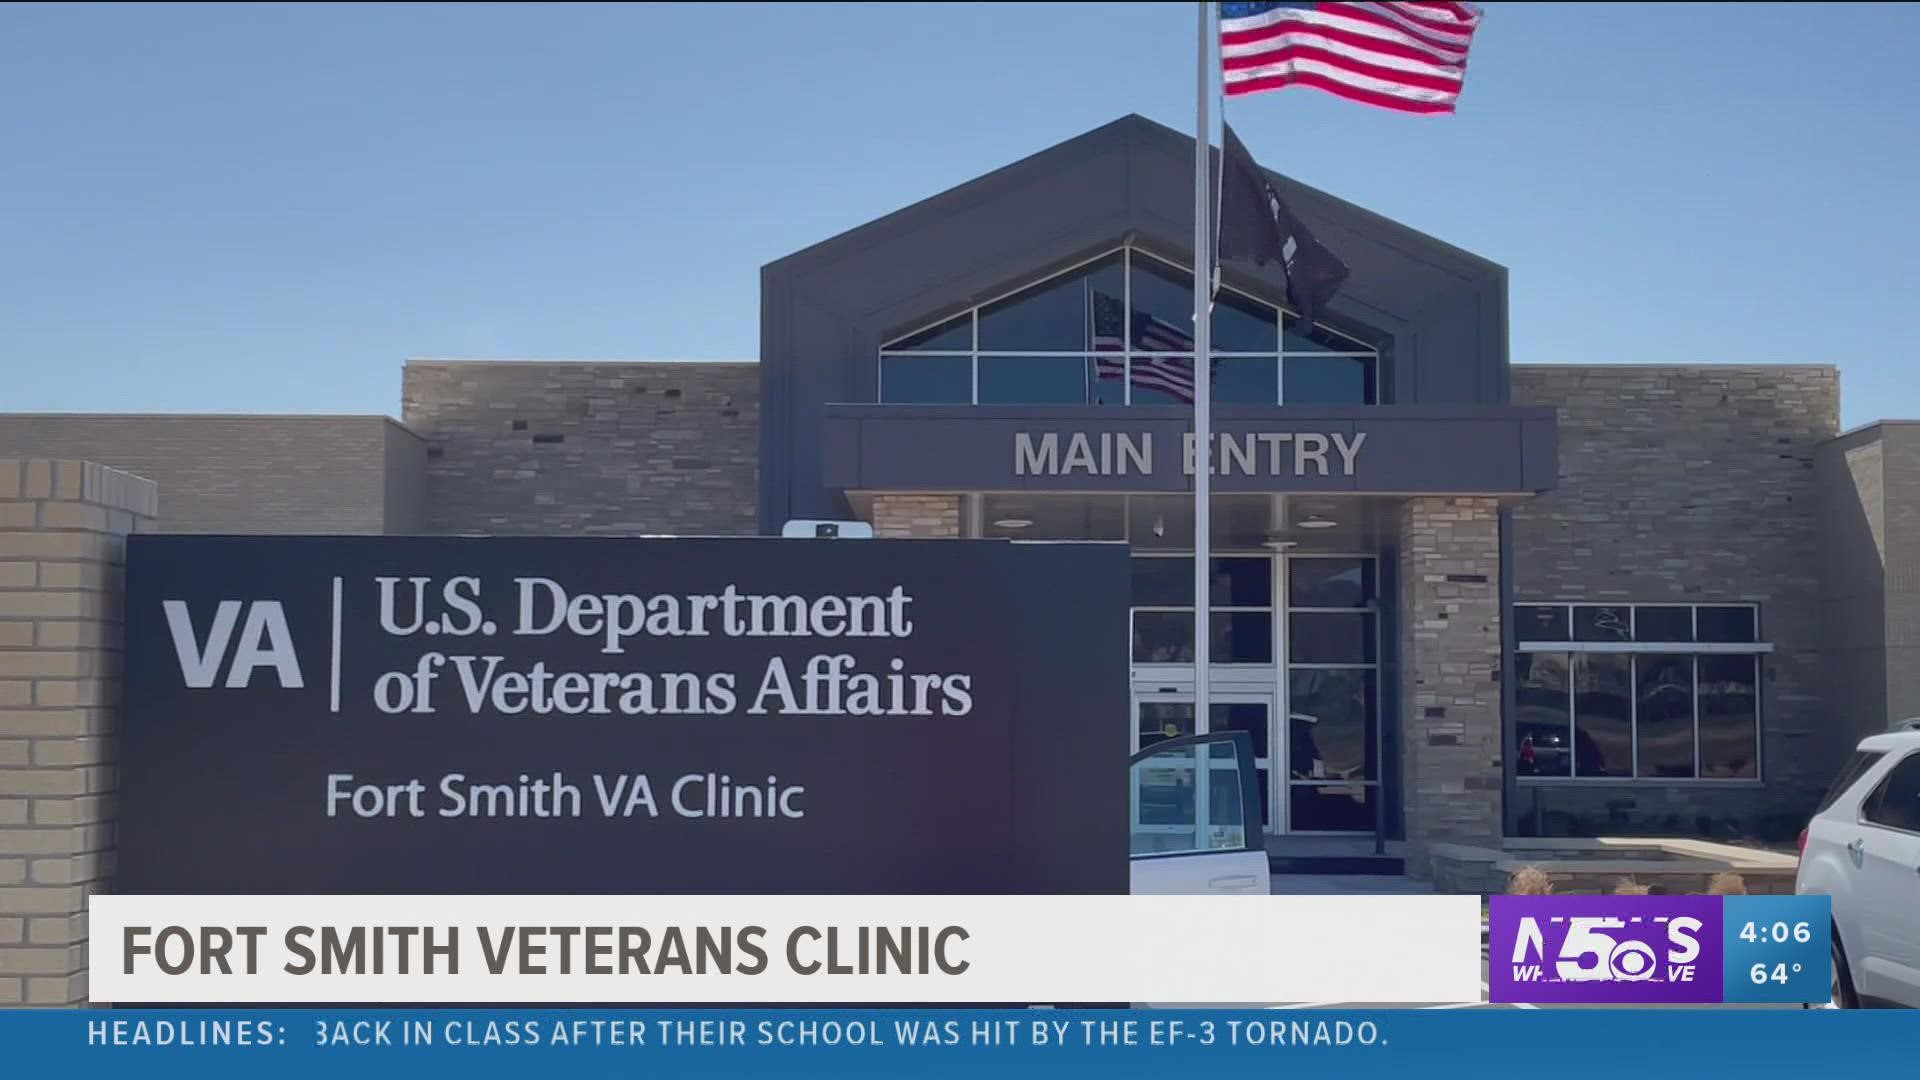 Veterans will have access to several services at the new clinic located in Fort Smith.